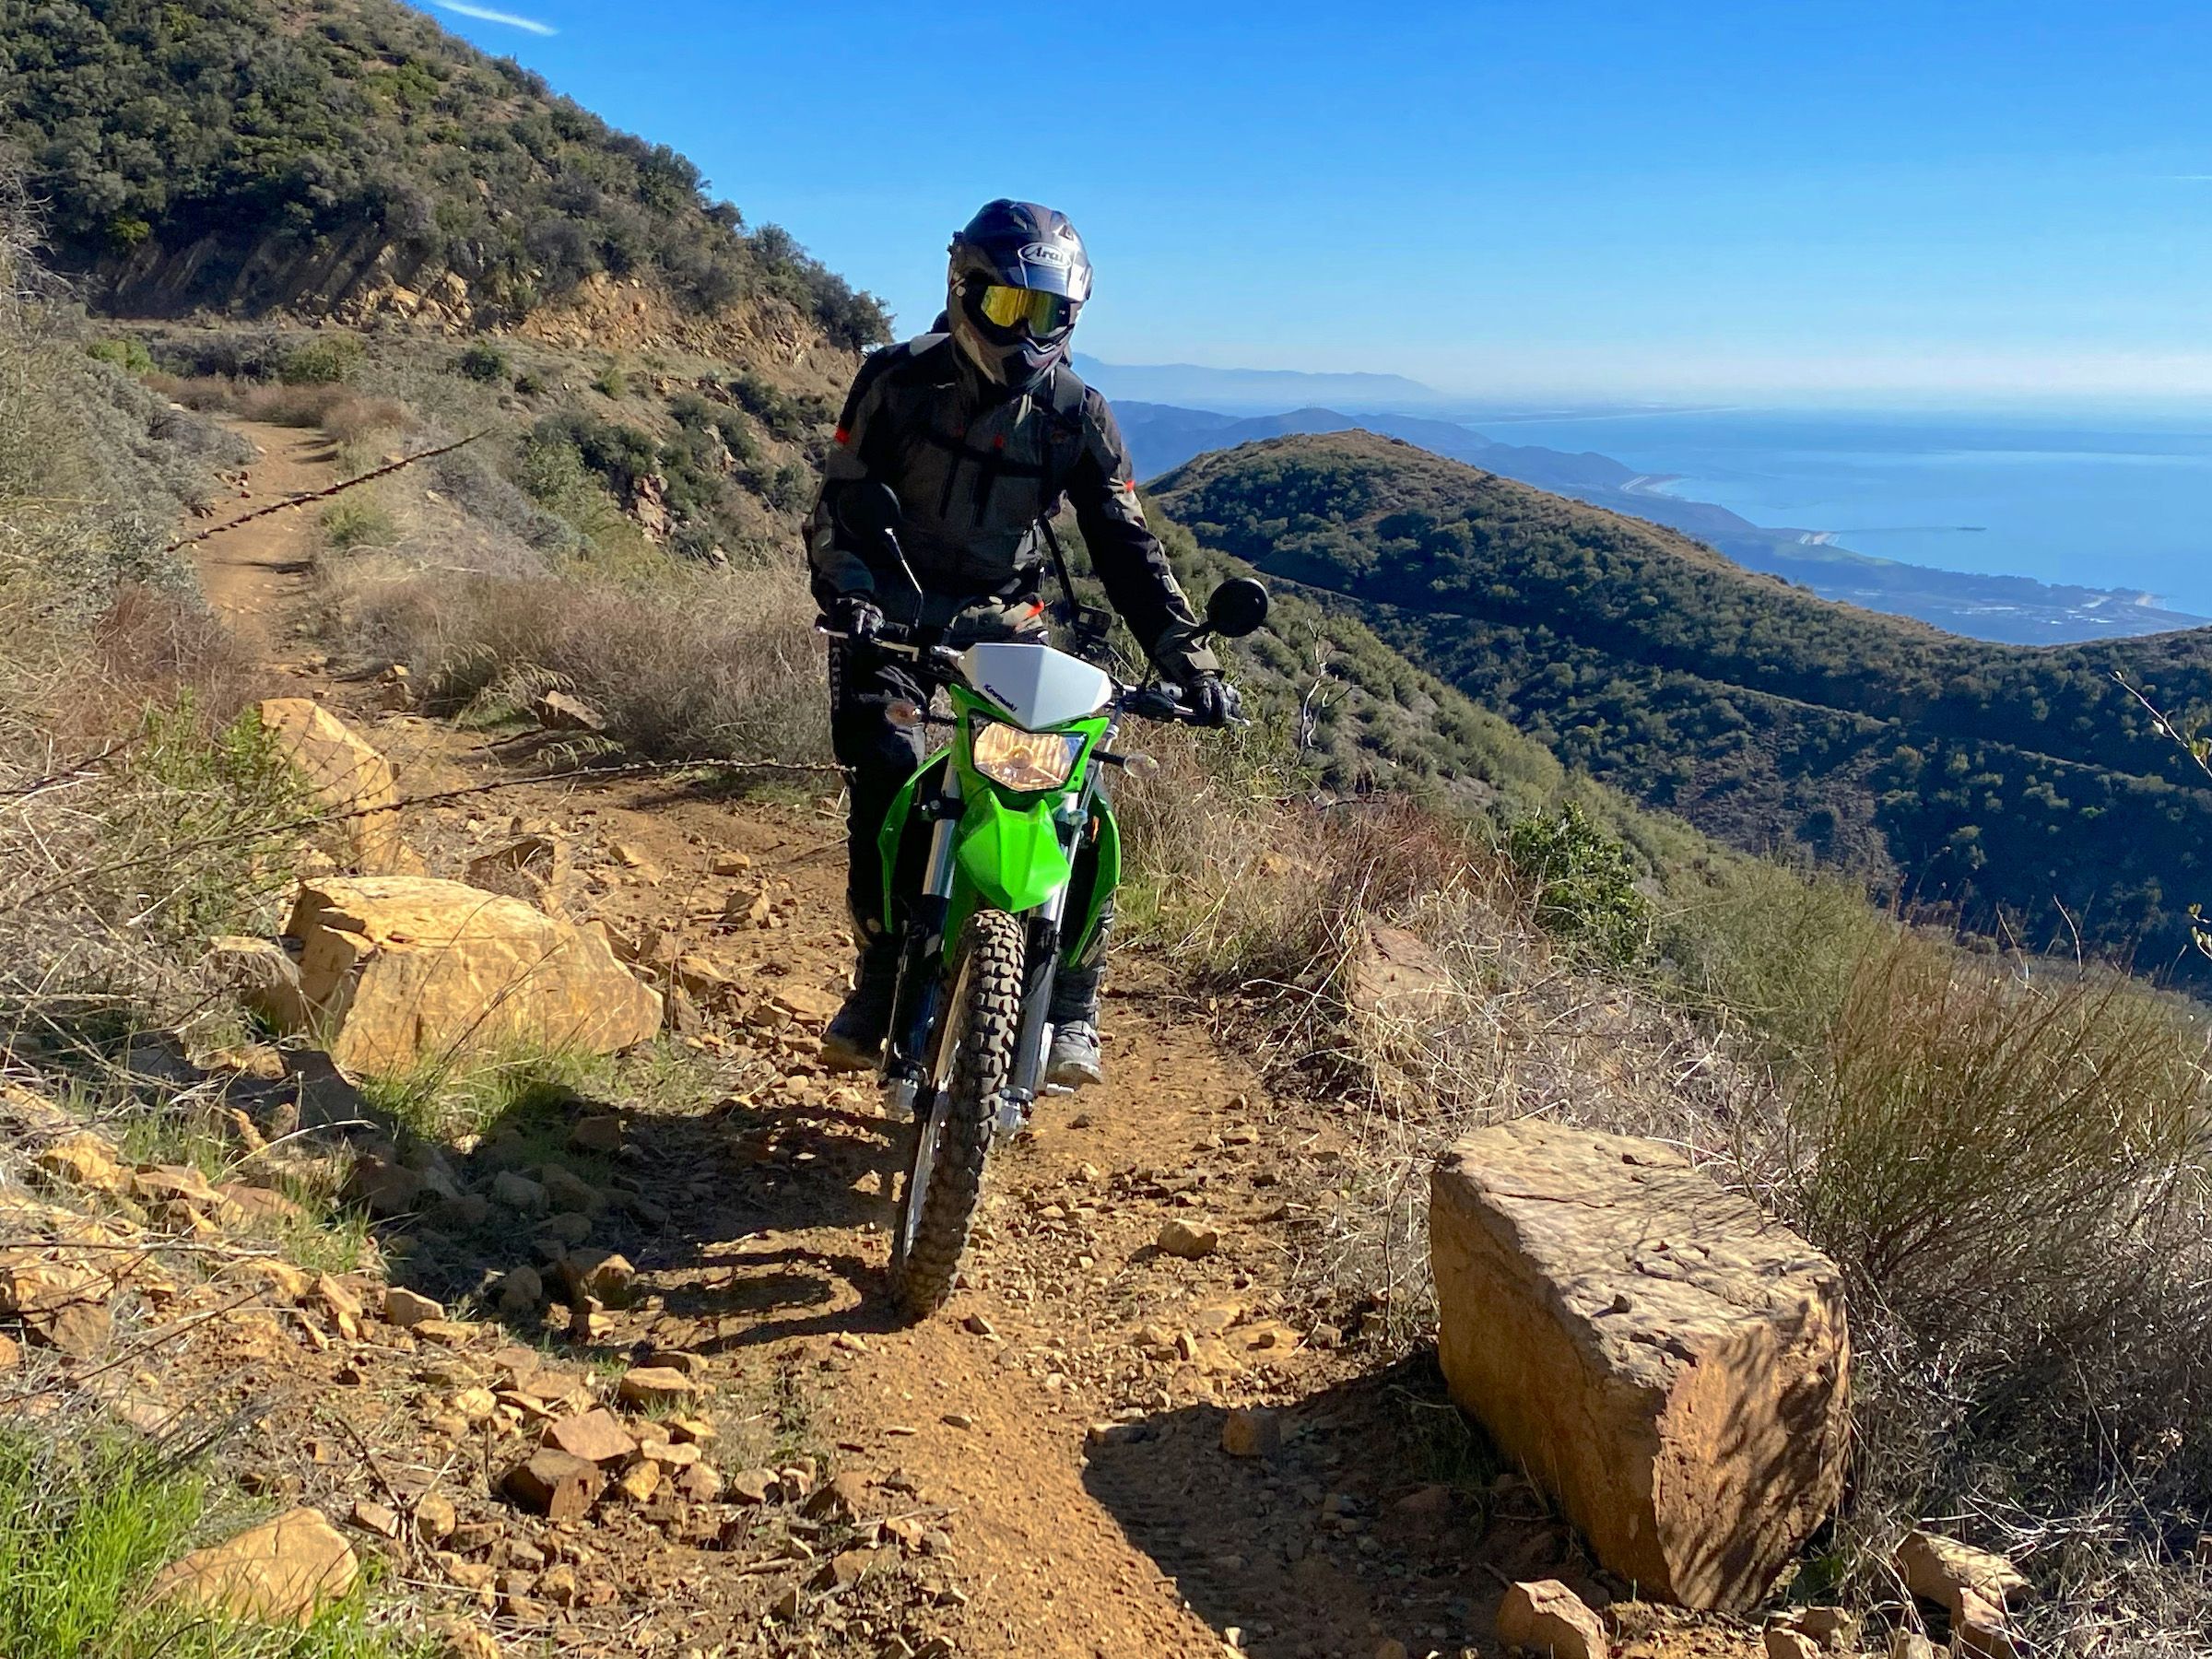 2023 Kawasaki KLX300 has an agile, rigid chassis ideal for off-road